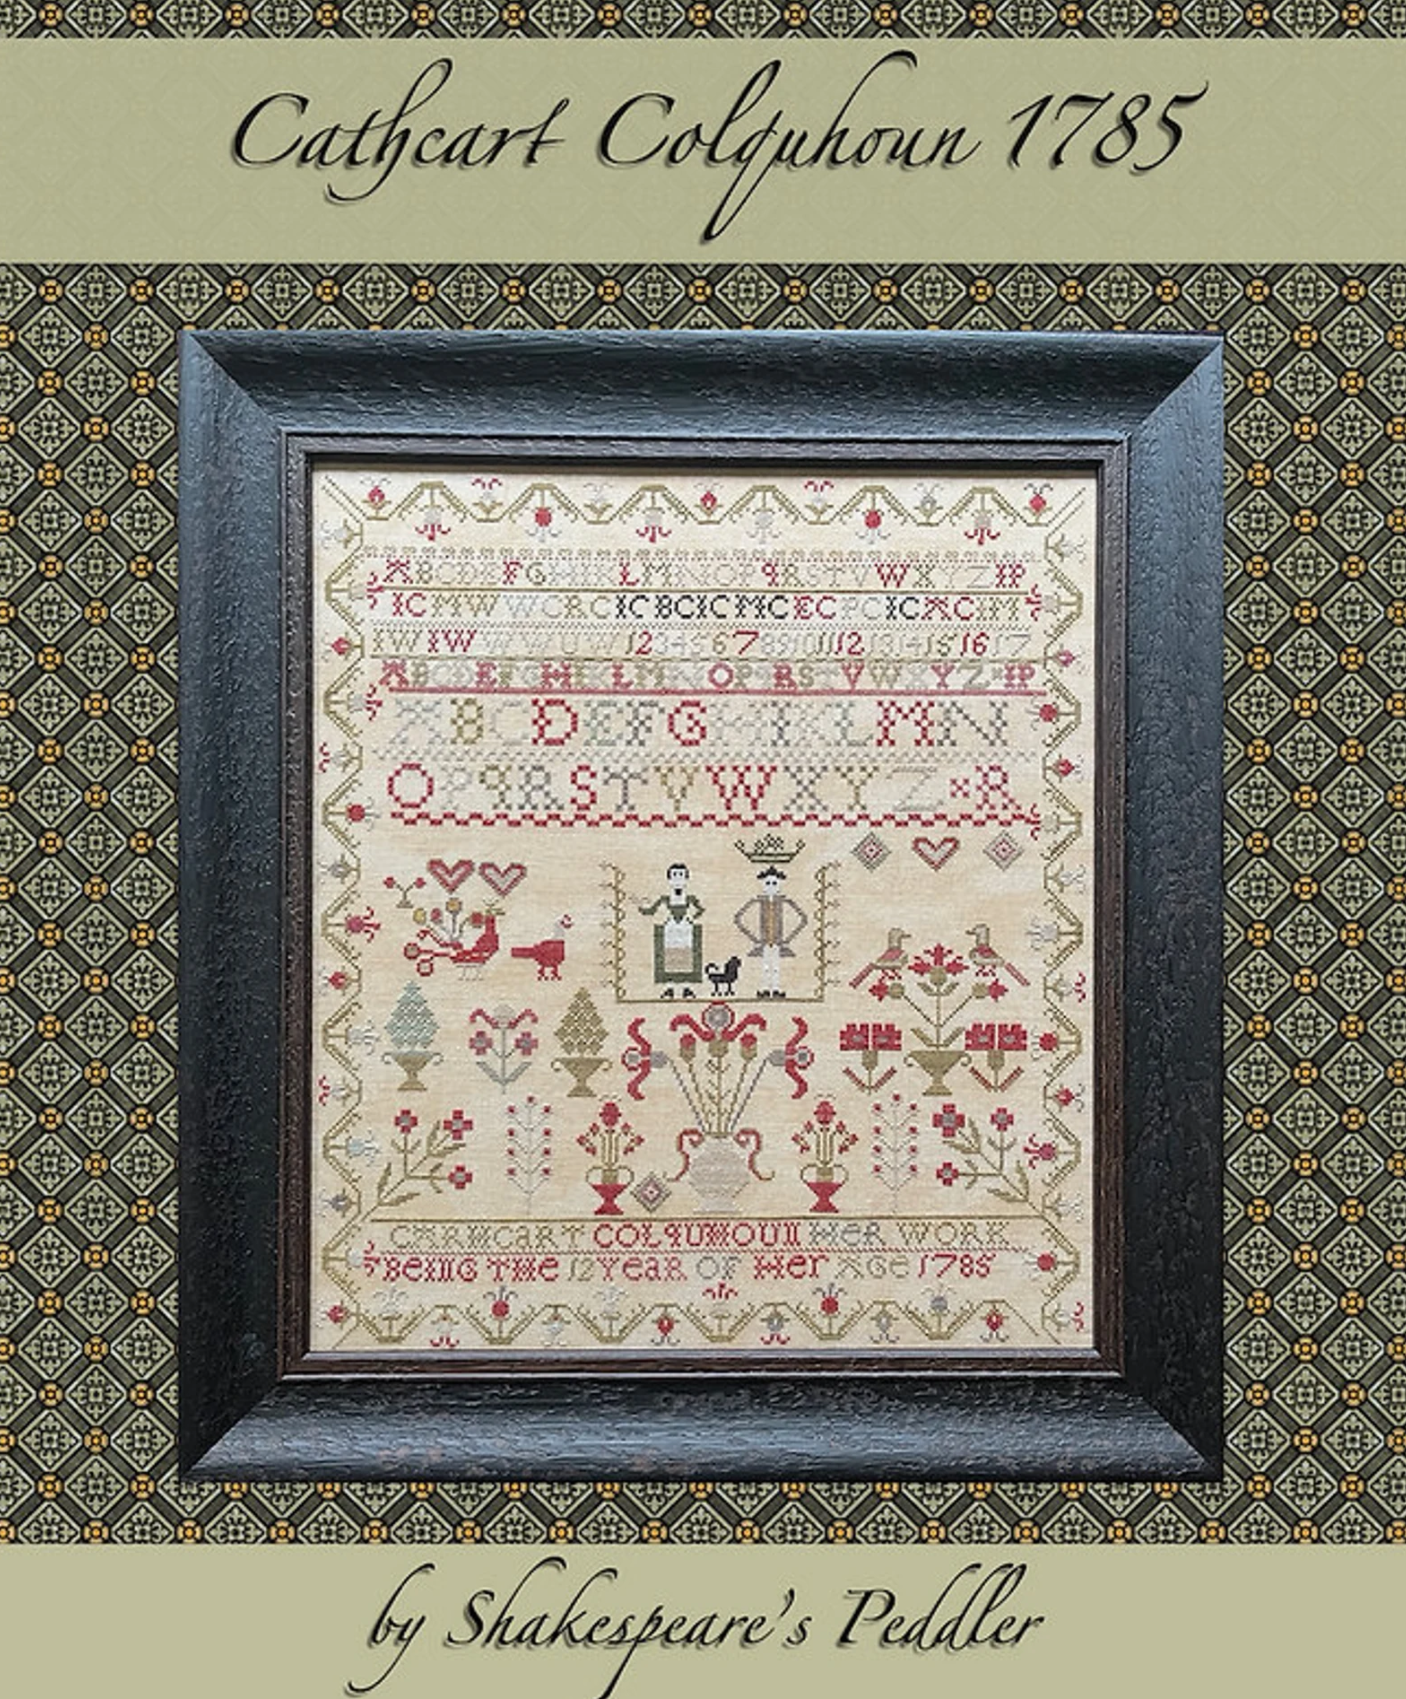 Cathcart Colquhoun 1785 - Reproduction Sampler Pattern by Shakespeare's Peddler